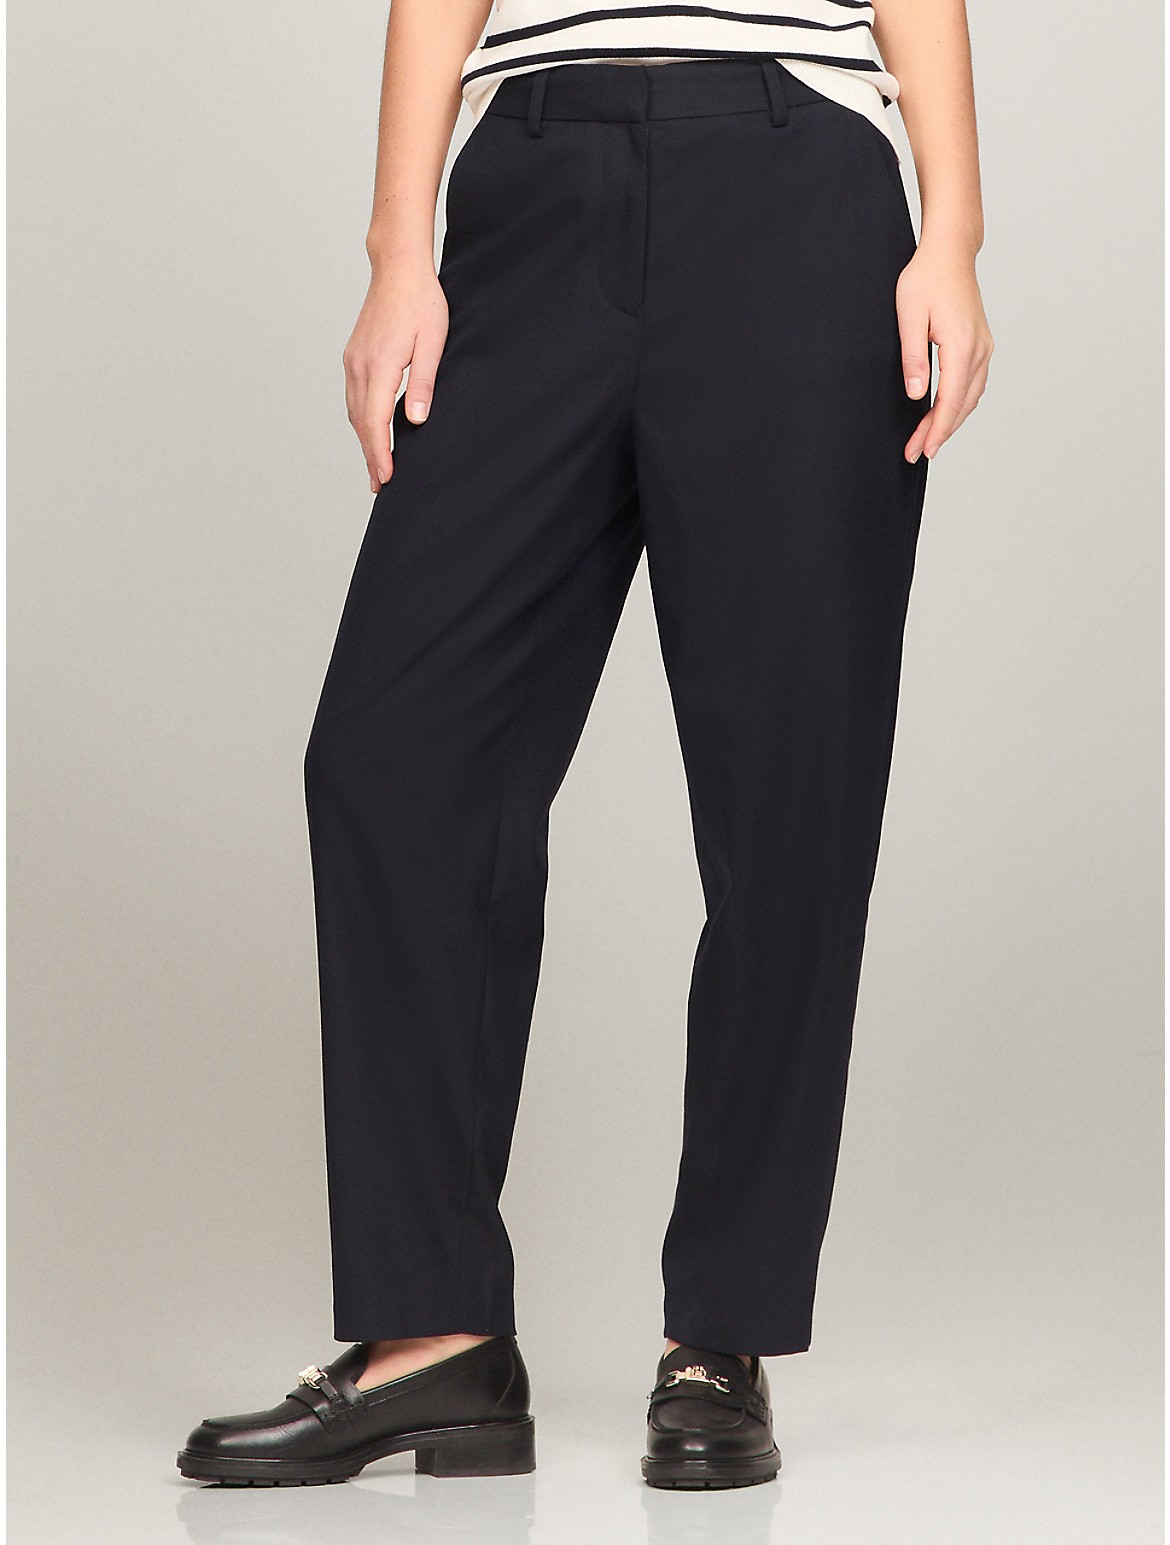 Tommy Hilfiger Women's Tapered Fit Pant